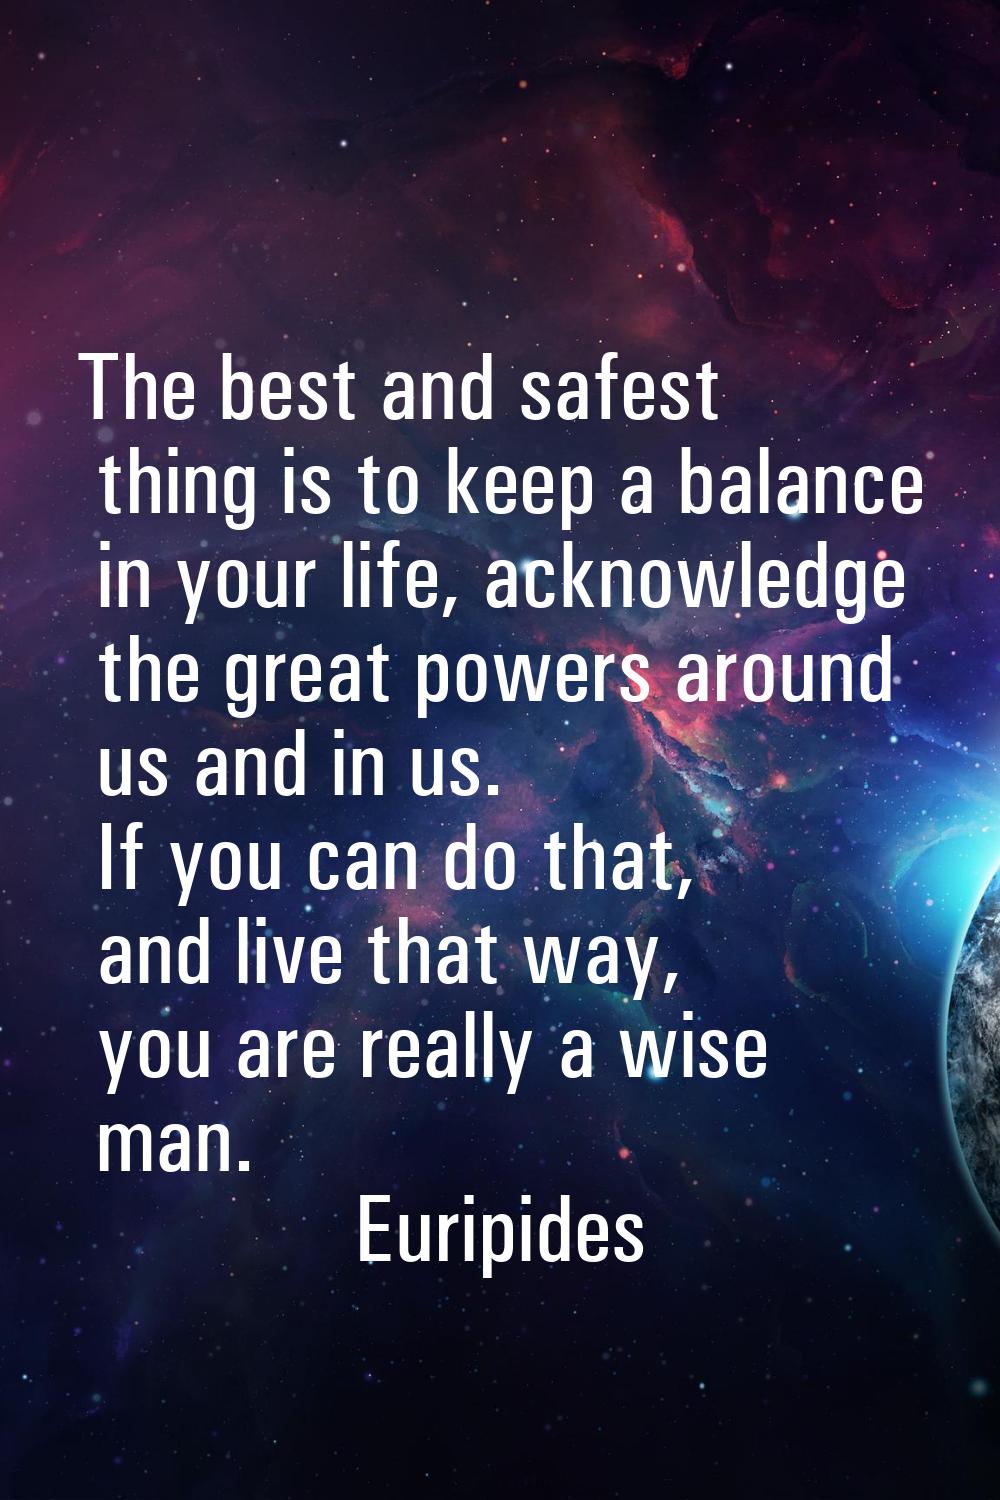 The best and safest thing is to keep a balance in your life, acknowledge the great powers around us